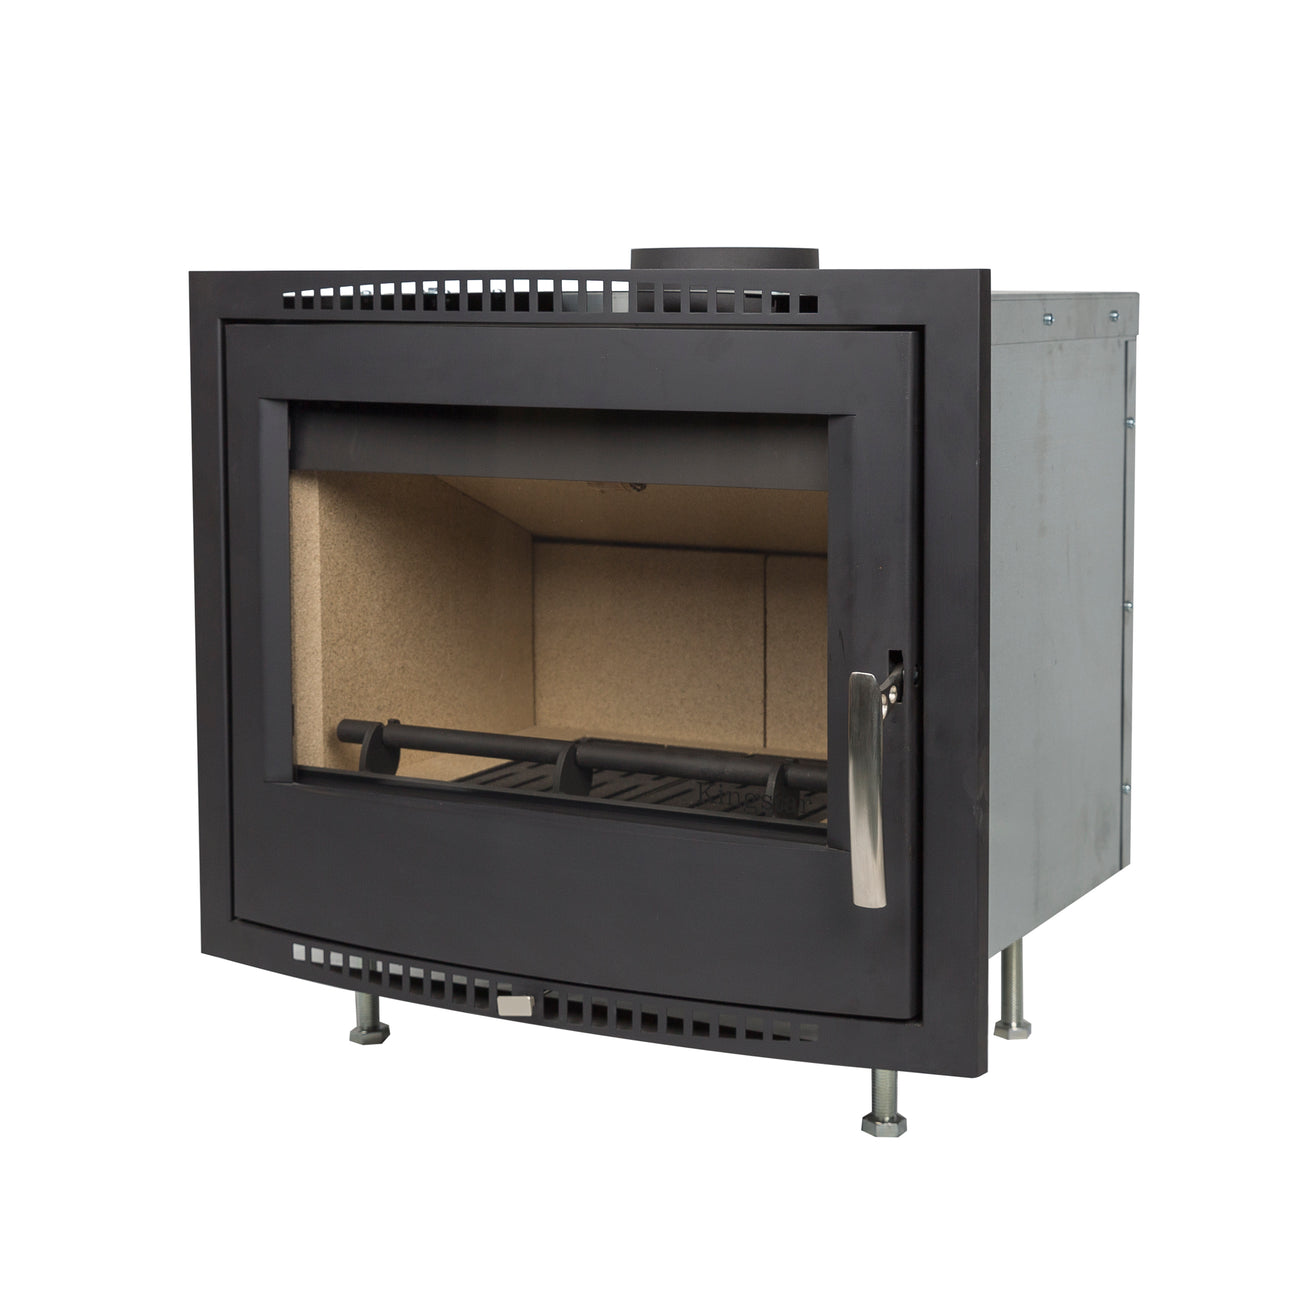 Shannon Passive Eco Stove shown with external air, air ducting and modern design -ideal for a passive house.